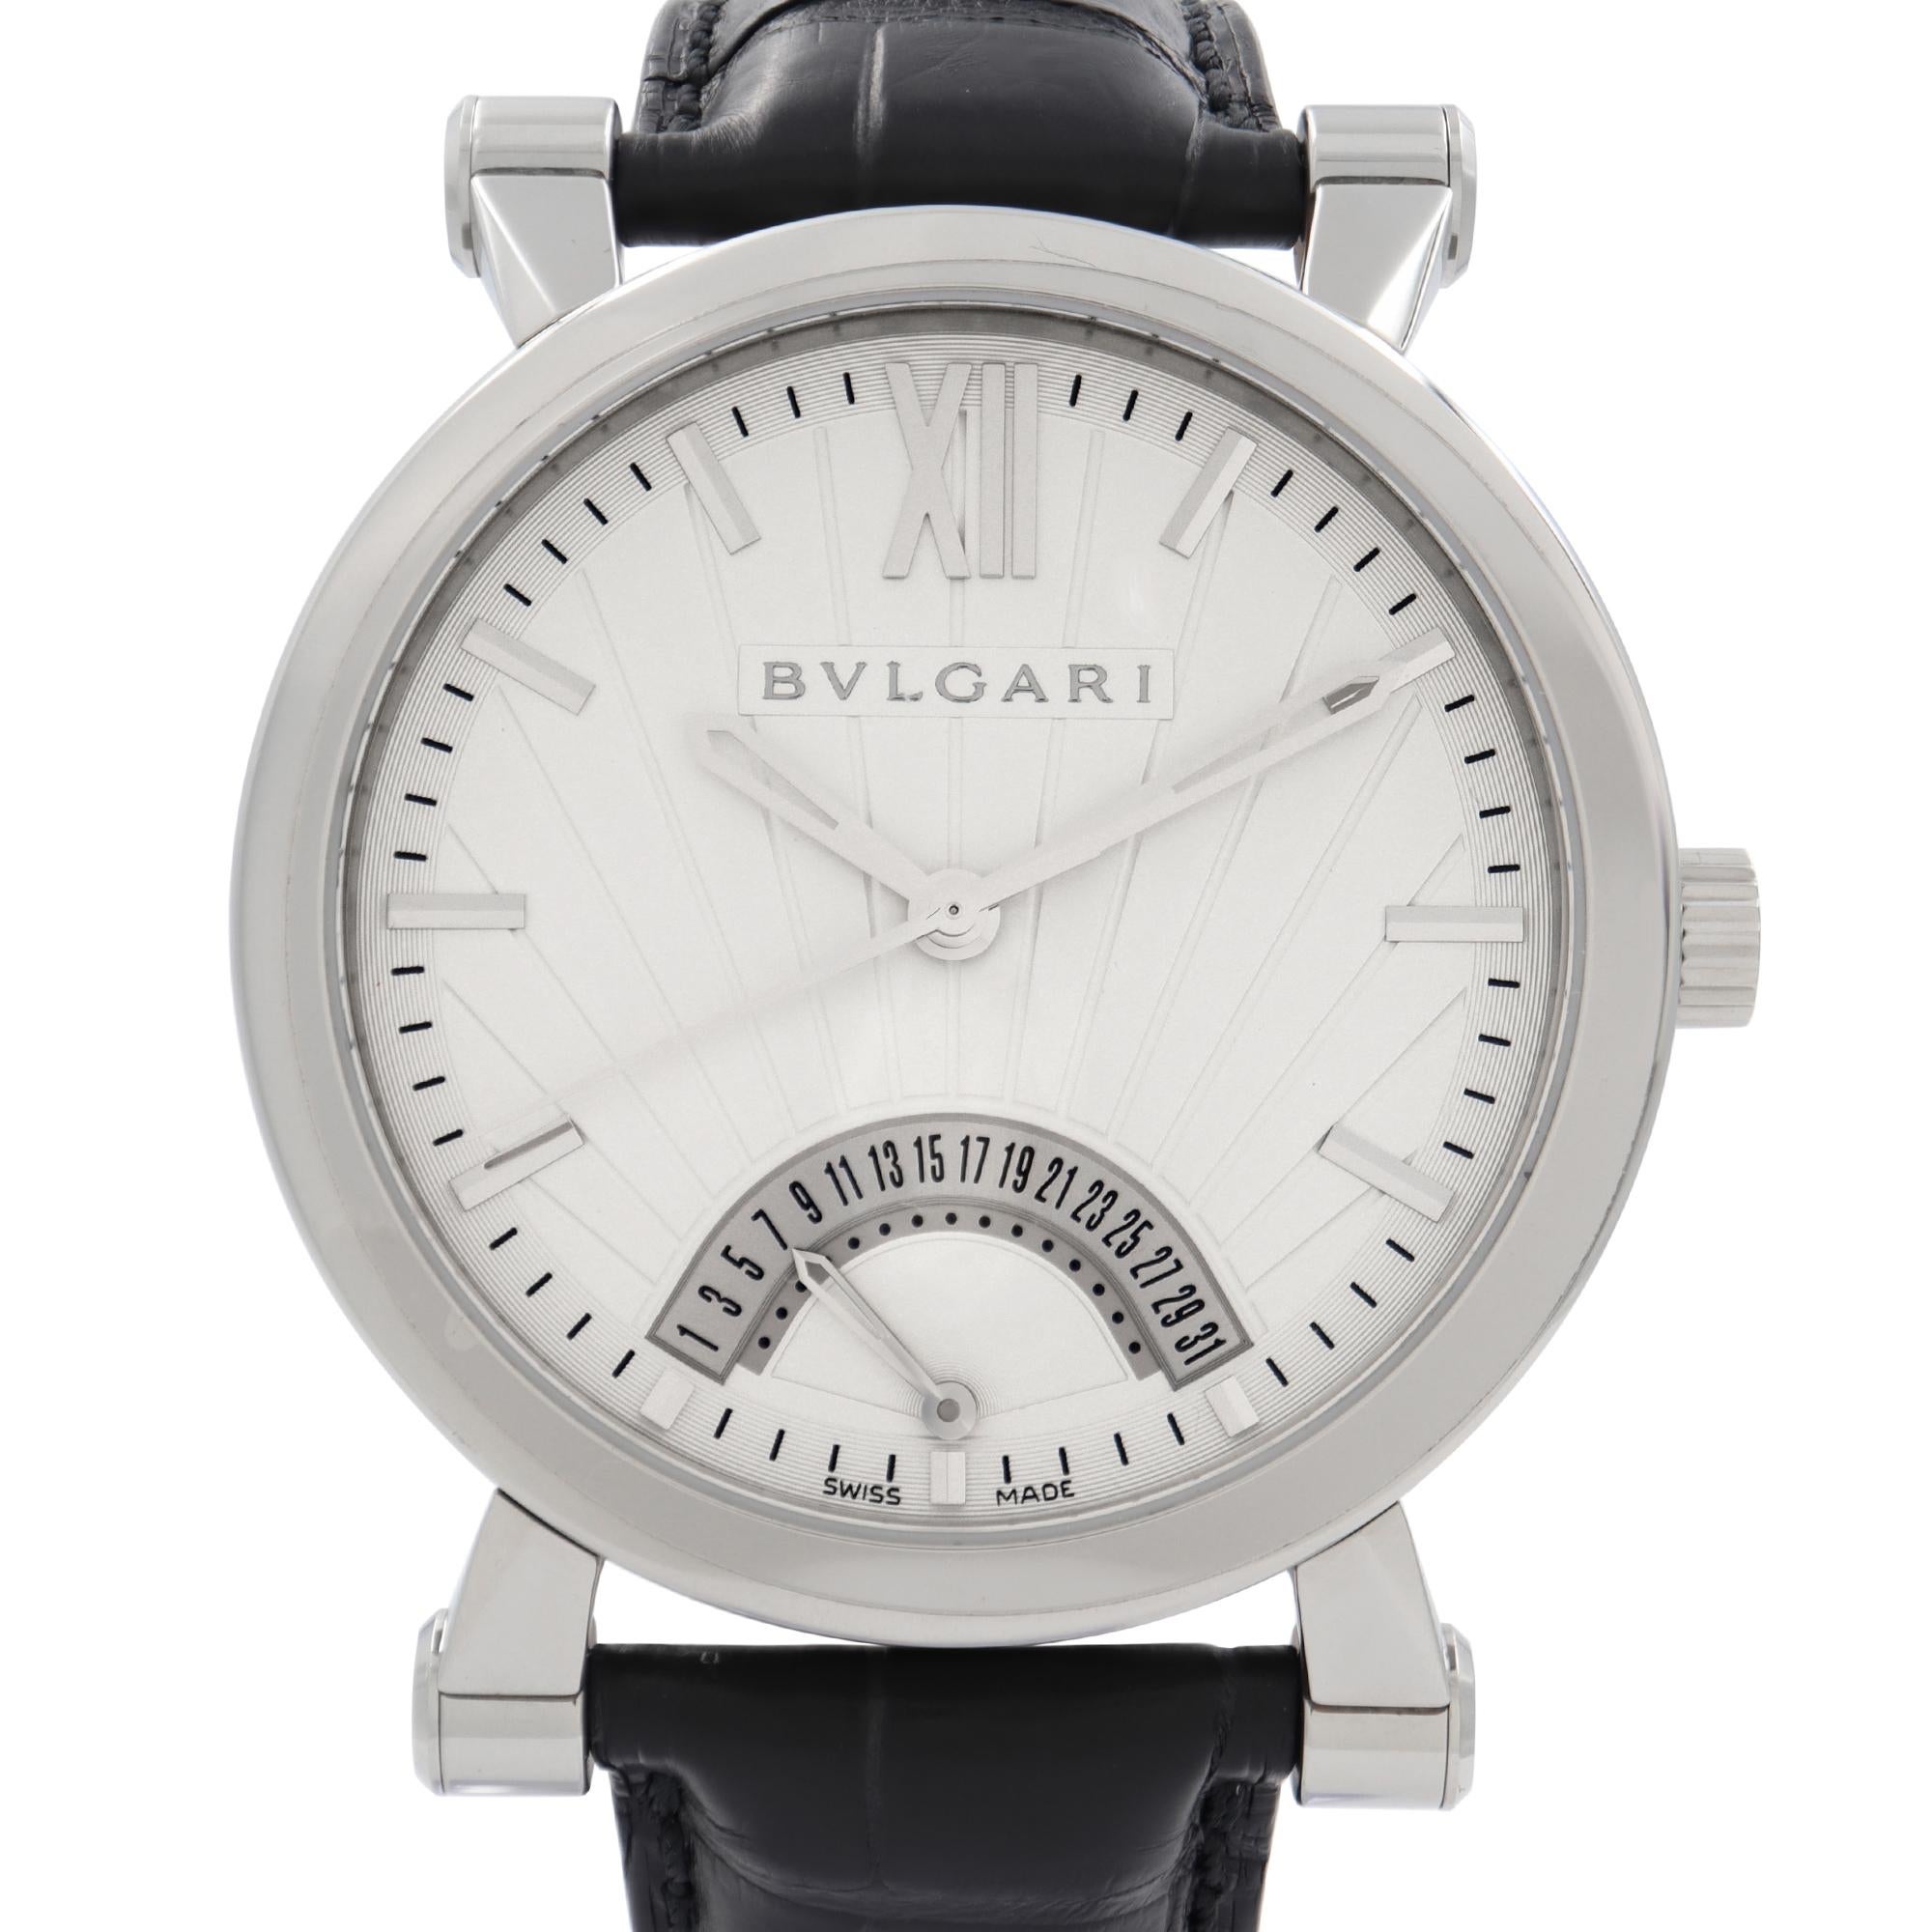 Display Model Bvlgari Sotirio Retrograde Steel White Dial Automatic Mens Watch. This Beautiful Timepiece Features: 	Two-Piece Strap Black Crocodile Band Type, White Dial with Full Date Indicator. Original Box and Papers are not included comes with a